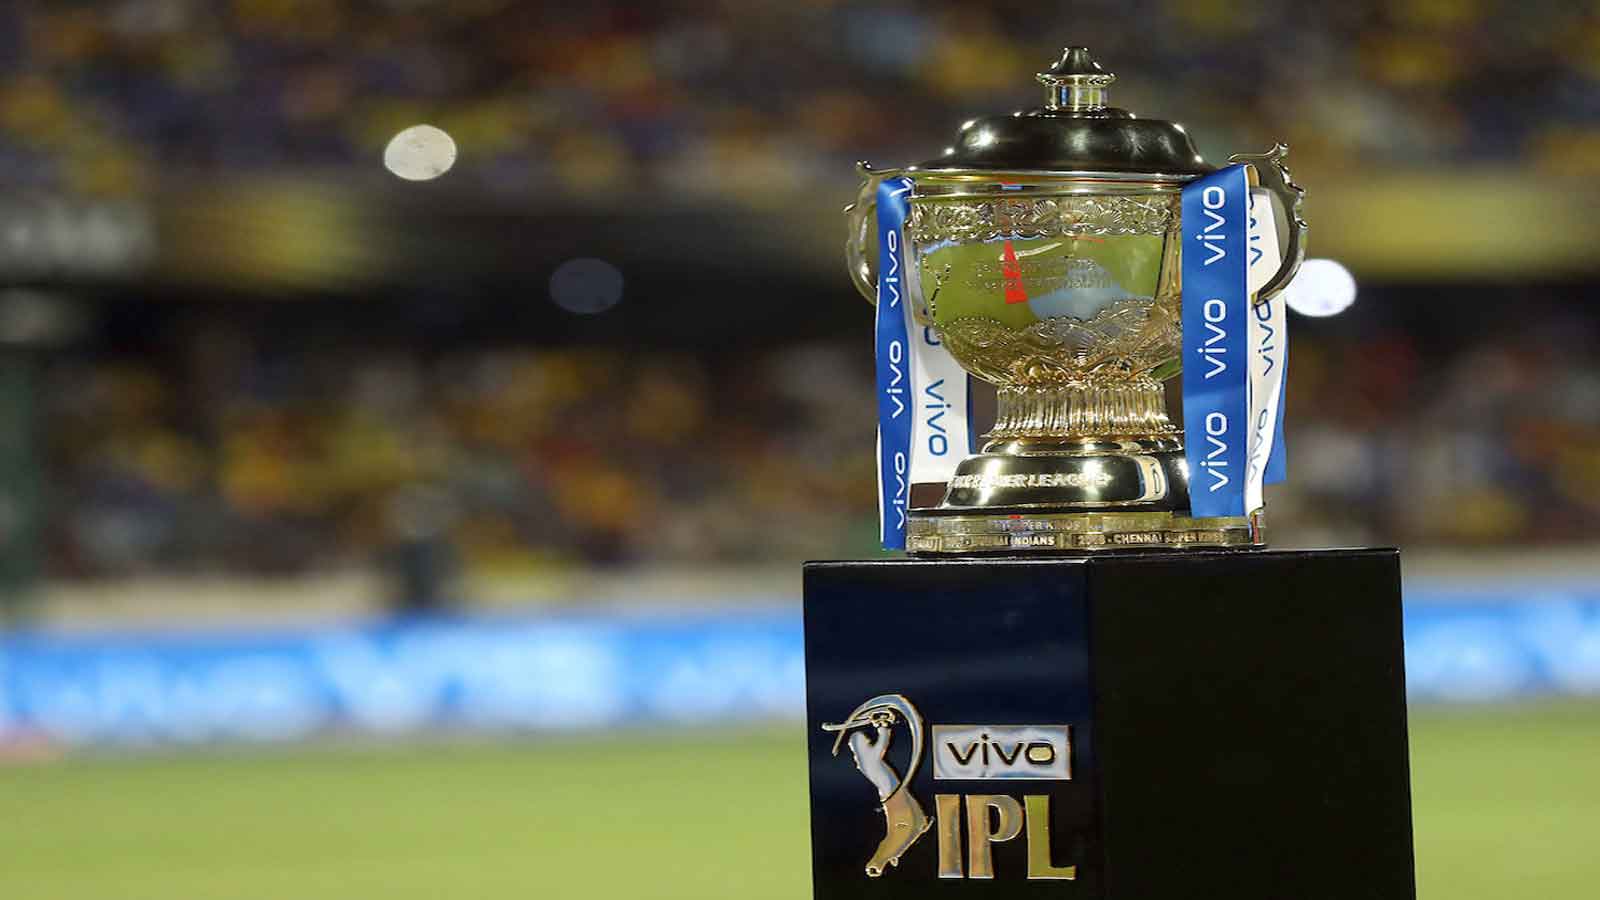 IPL 2020: Panic grips BCCI as Vivo likely to exit as Indian Premier League's title sponsor. Sports of India Videos